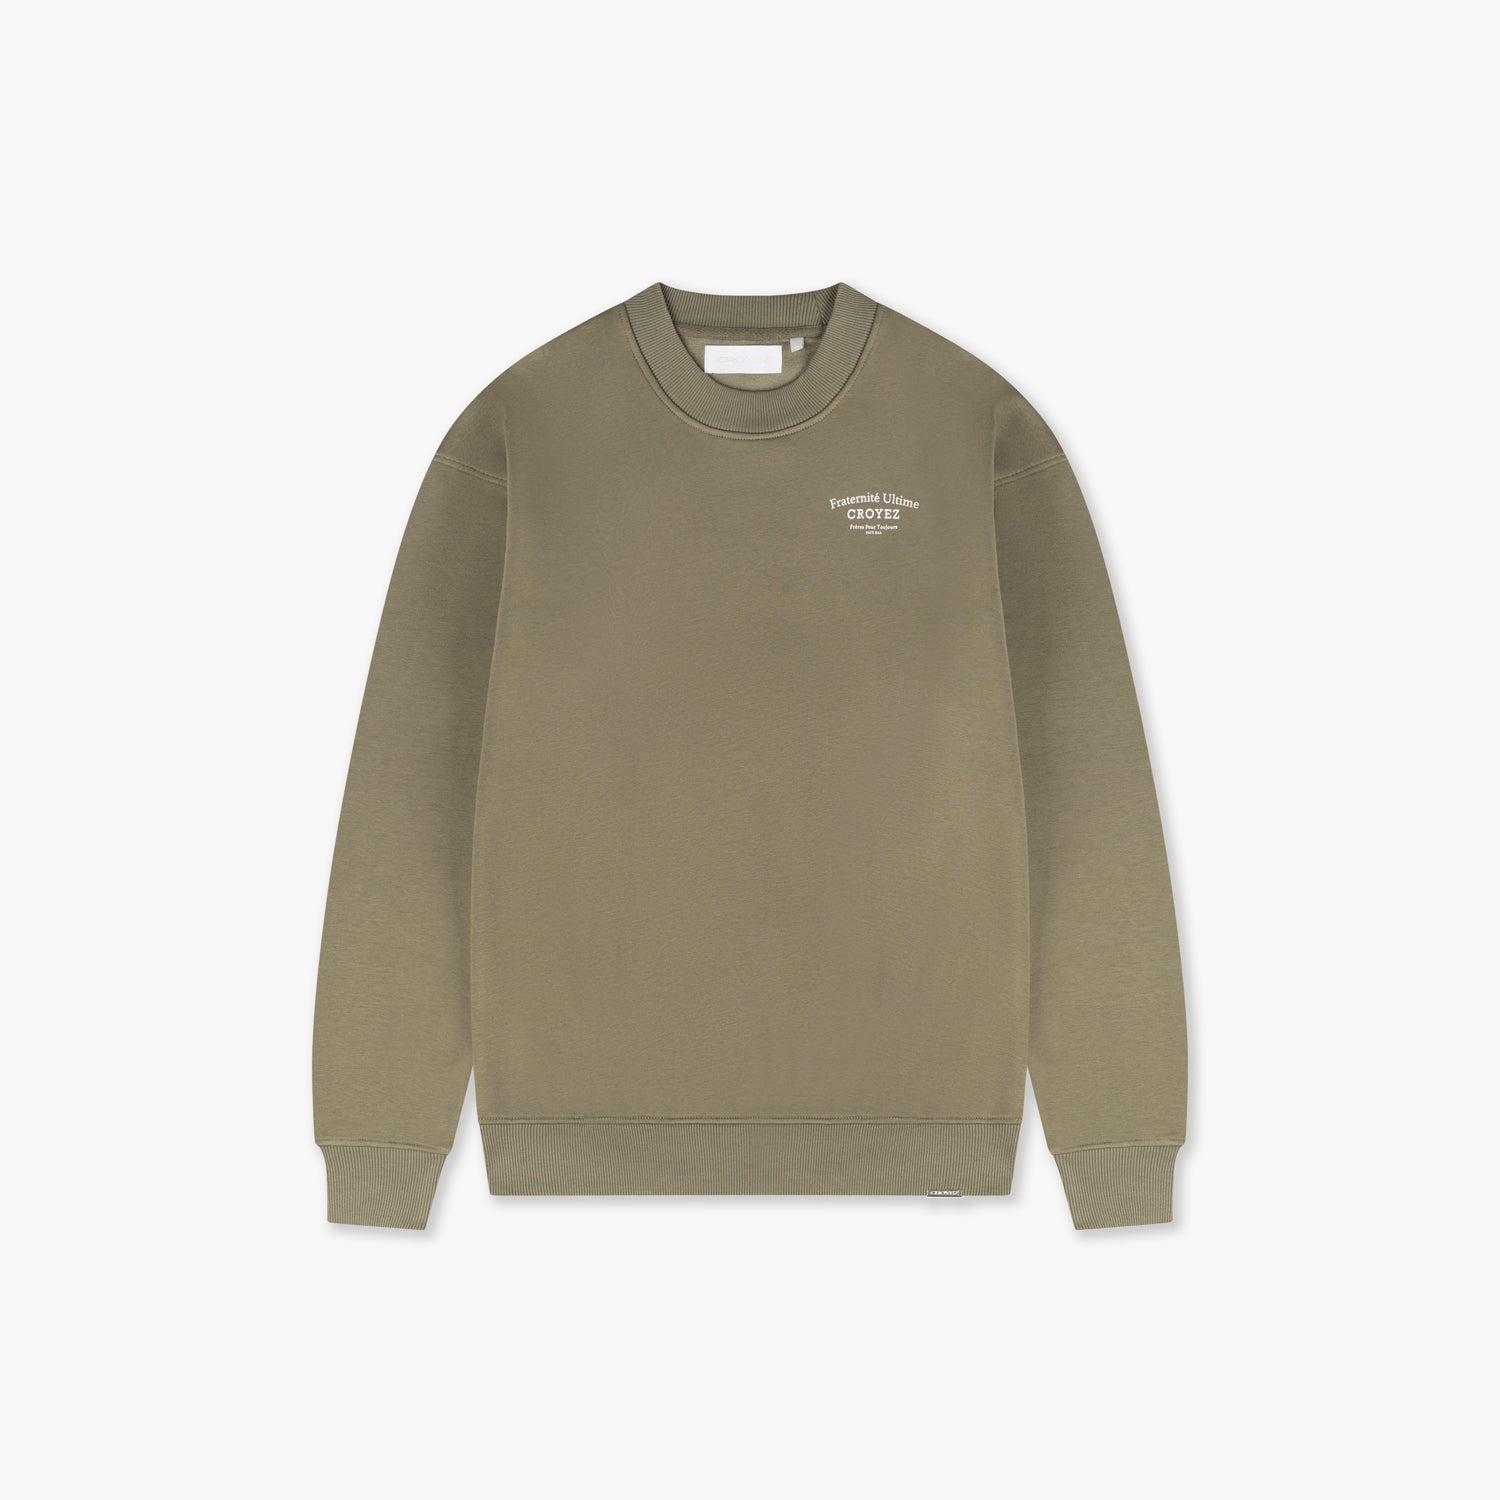 CROYEZ FRATERNITÉ SWEATER - OLIVE/WHITE